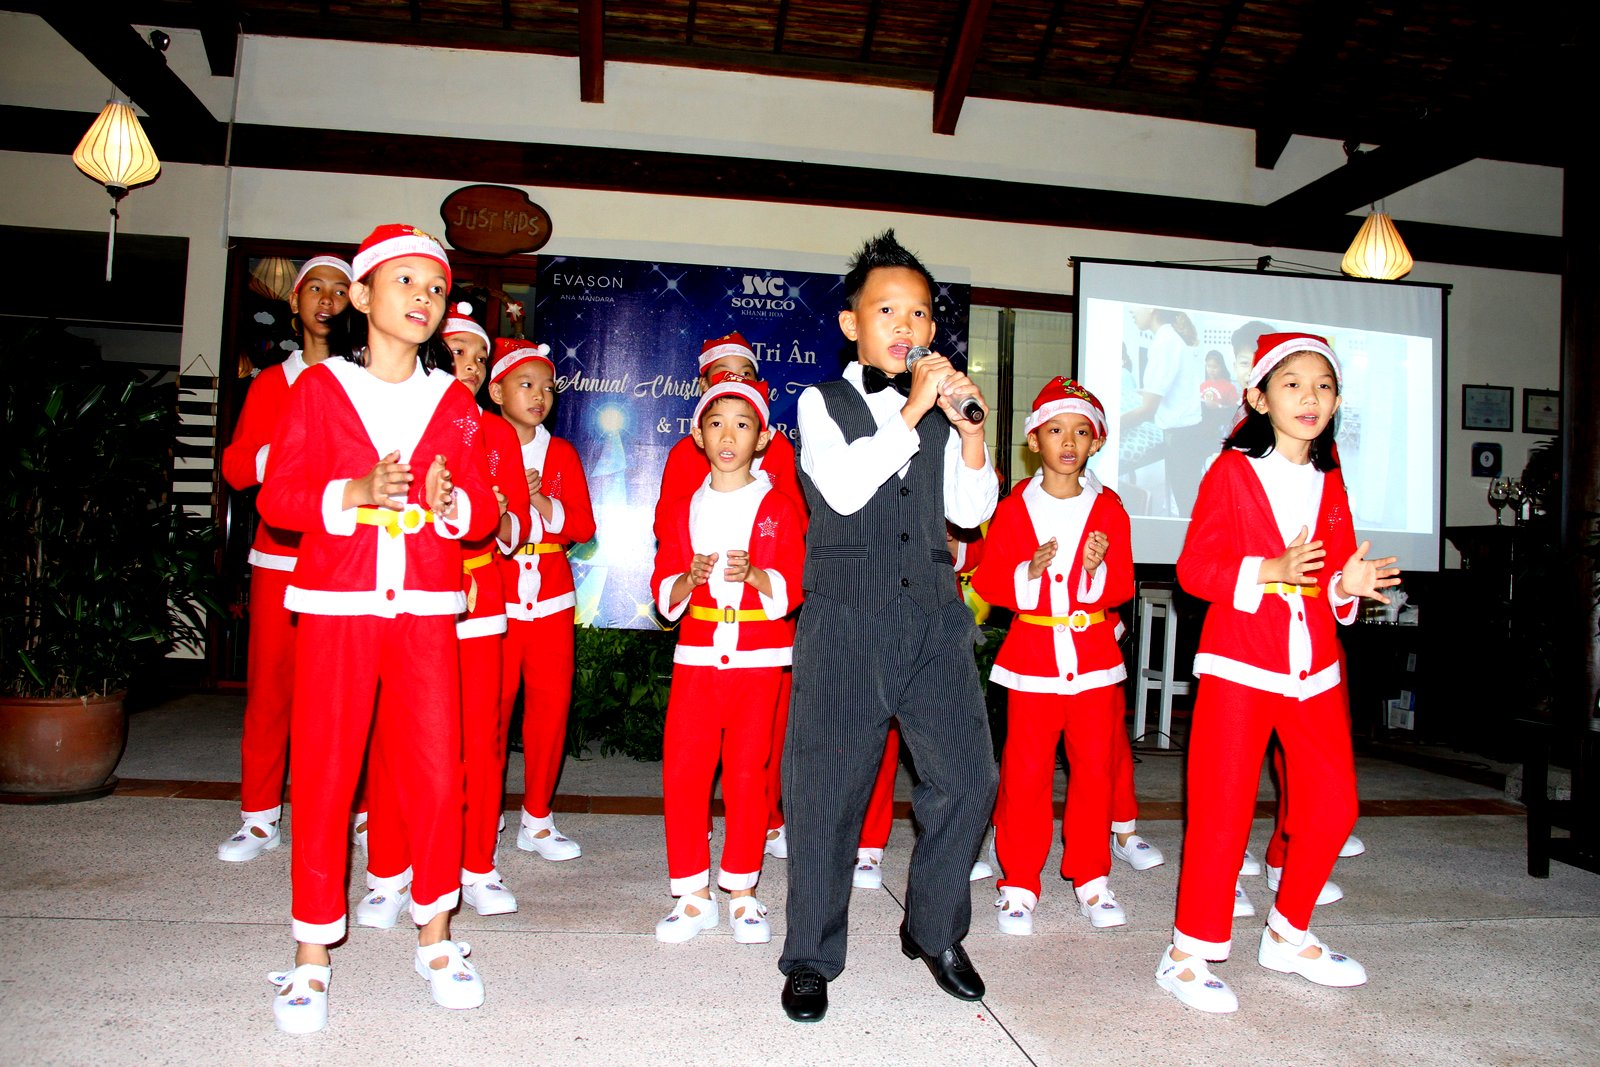 Children’s performance about Christmas